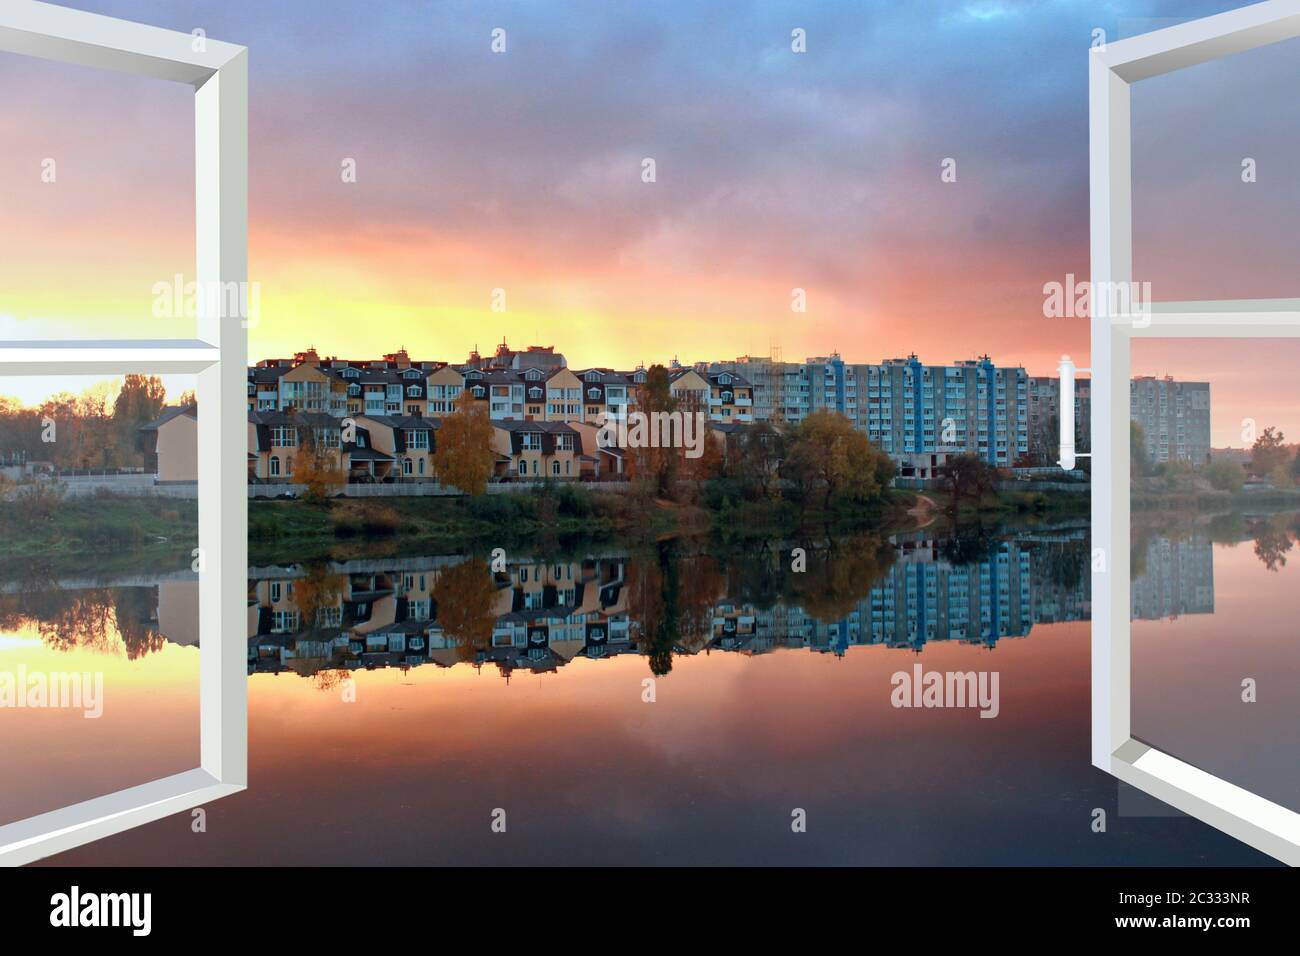 Window with view to beautiful sunset landscape and modern buildings reflected in lake Stock Photo